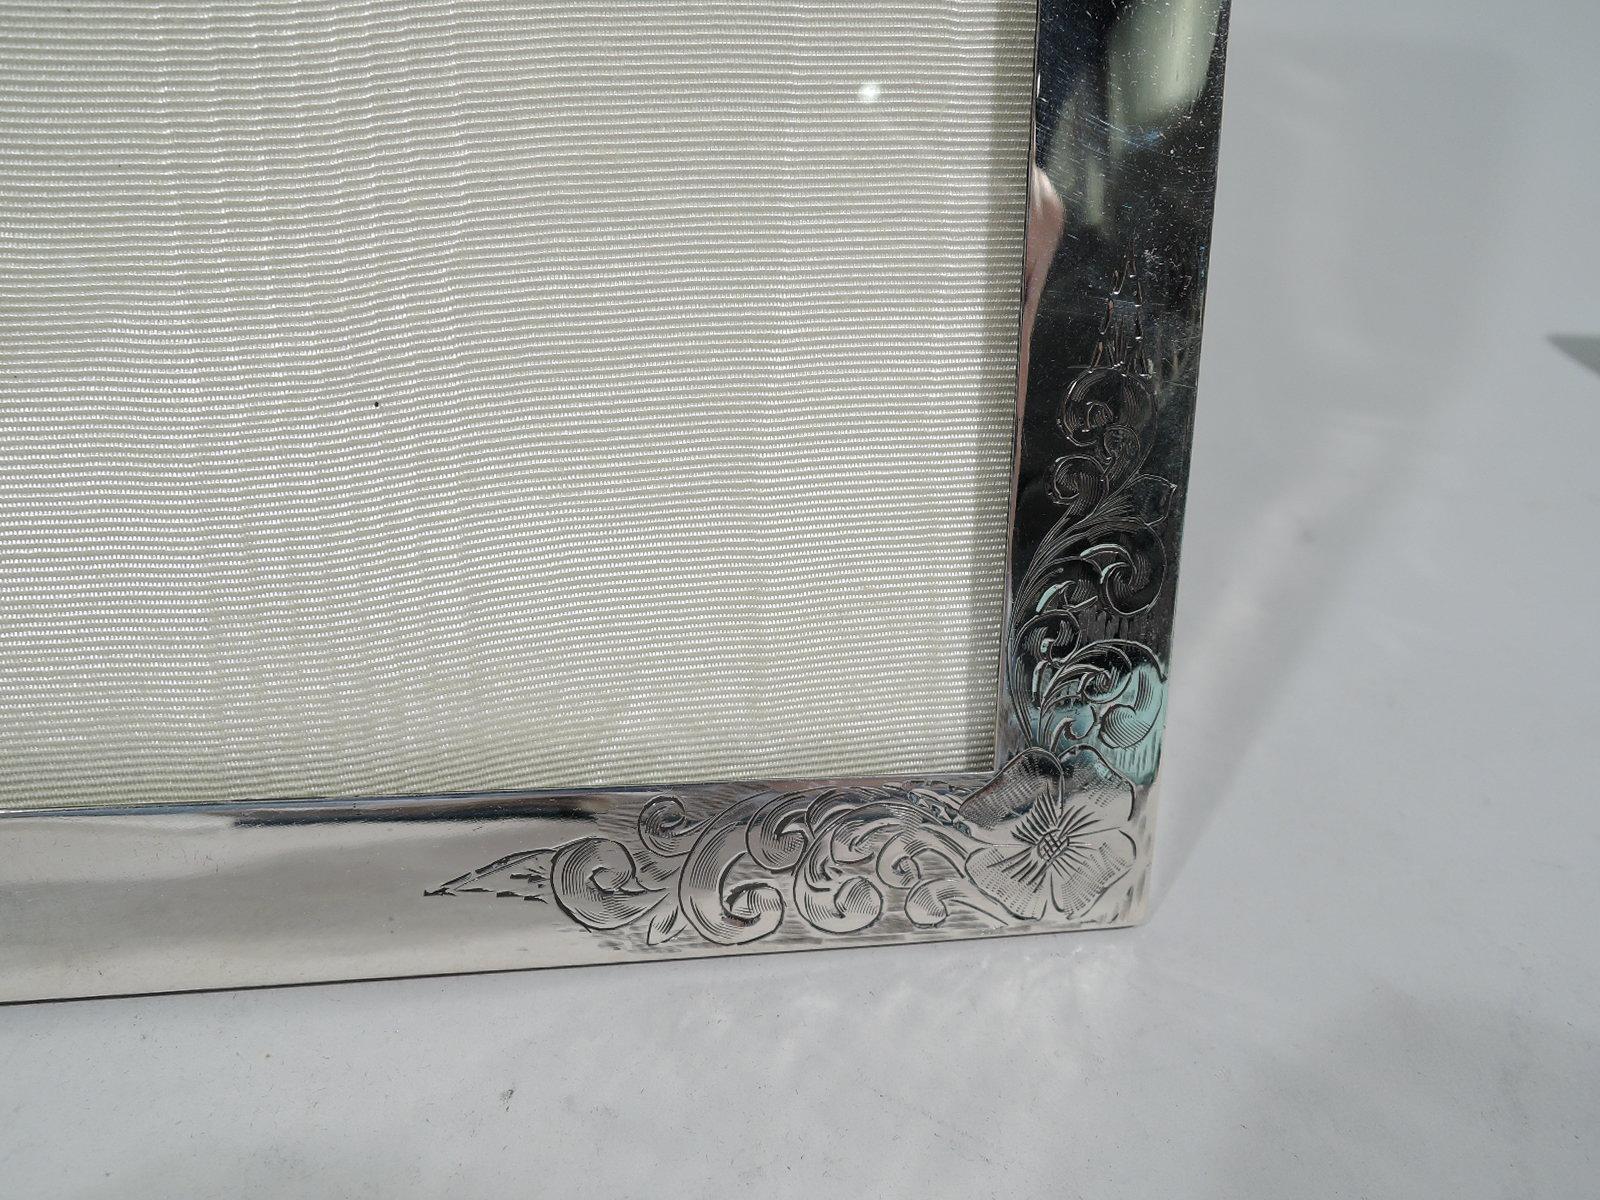 North American Antique American Edwardian Art Nouveau Sterling Silver Picture Frame